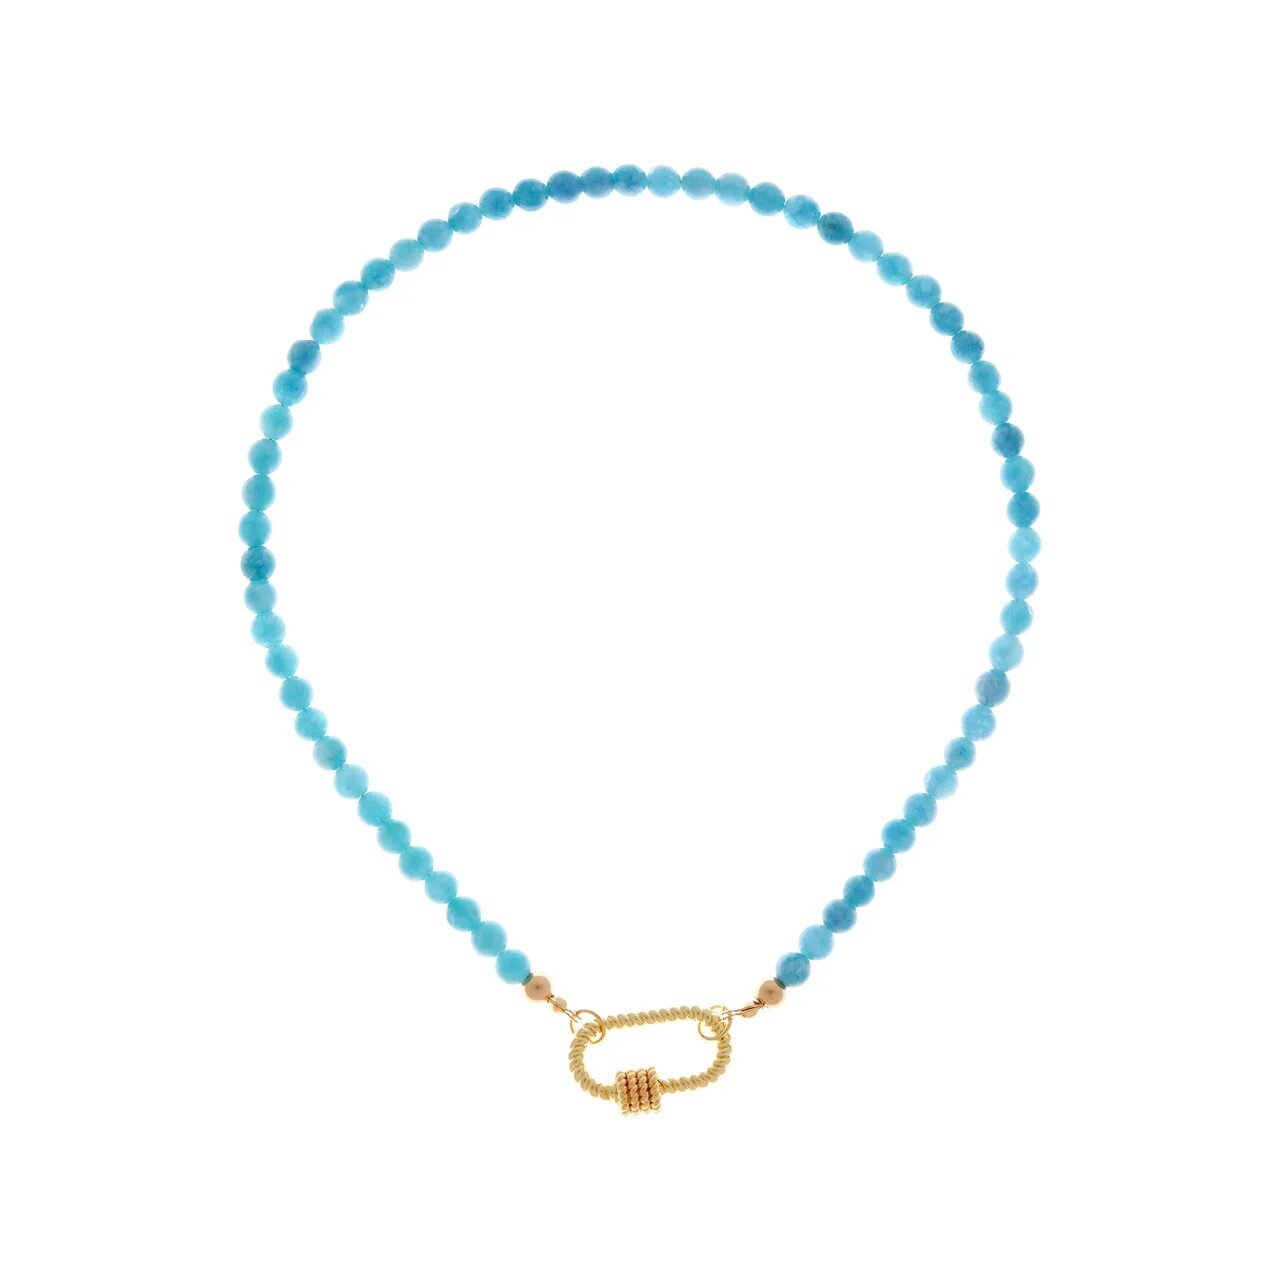 HOLLY JUNE Колье Carabiner Gold Turquoise Necklace holly june колье turquoise tube necklace